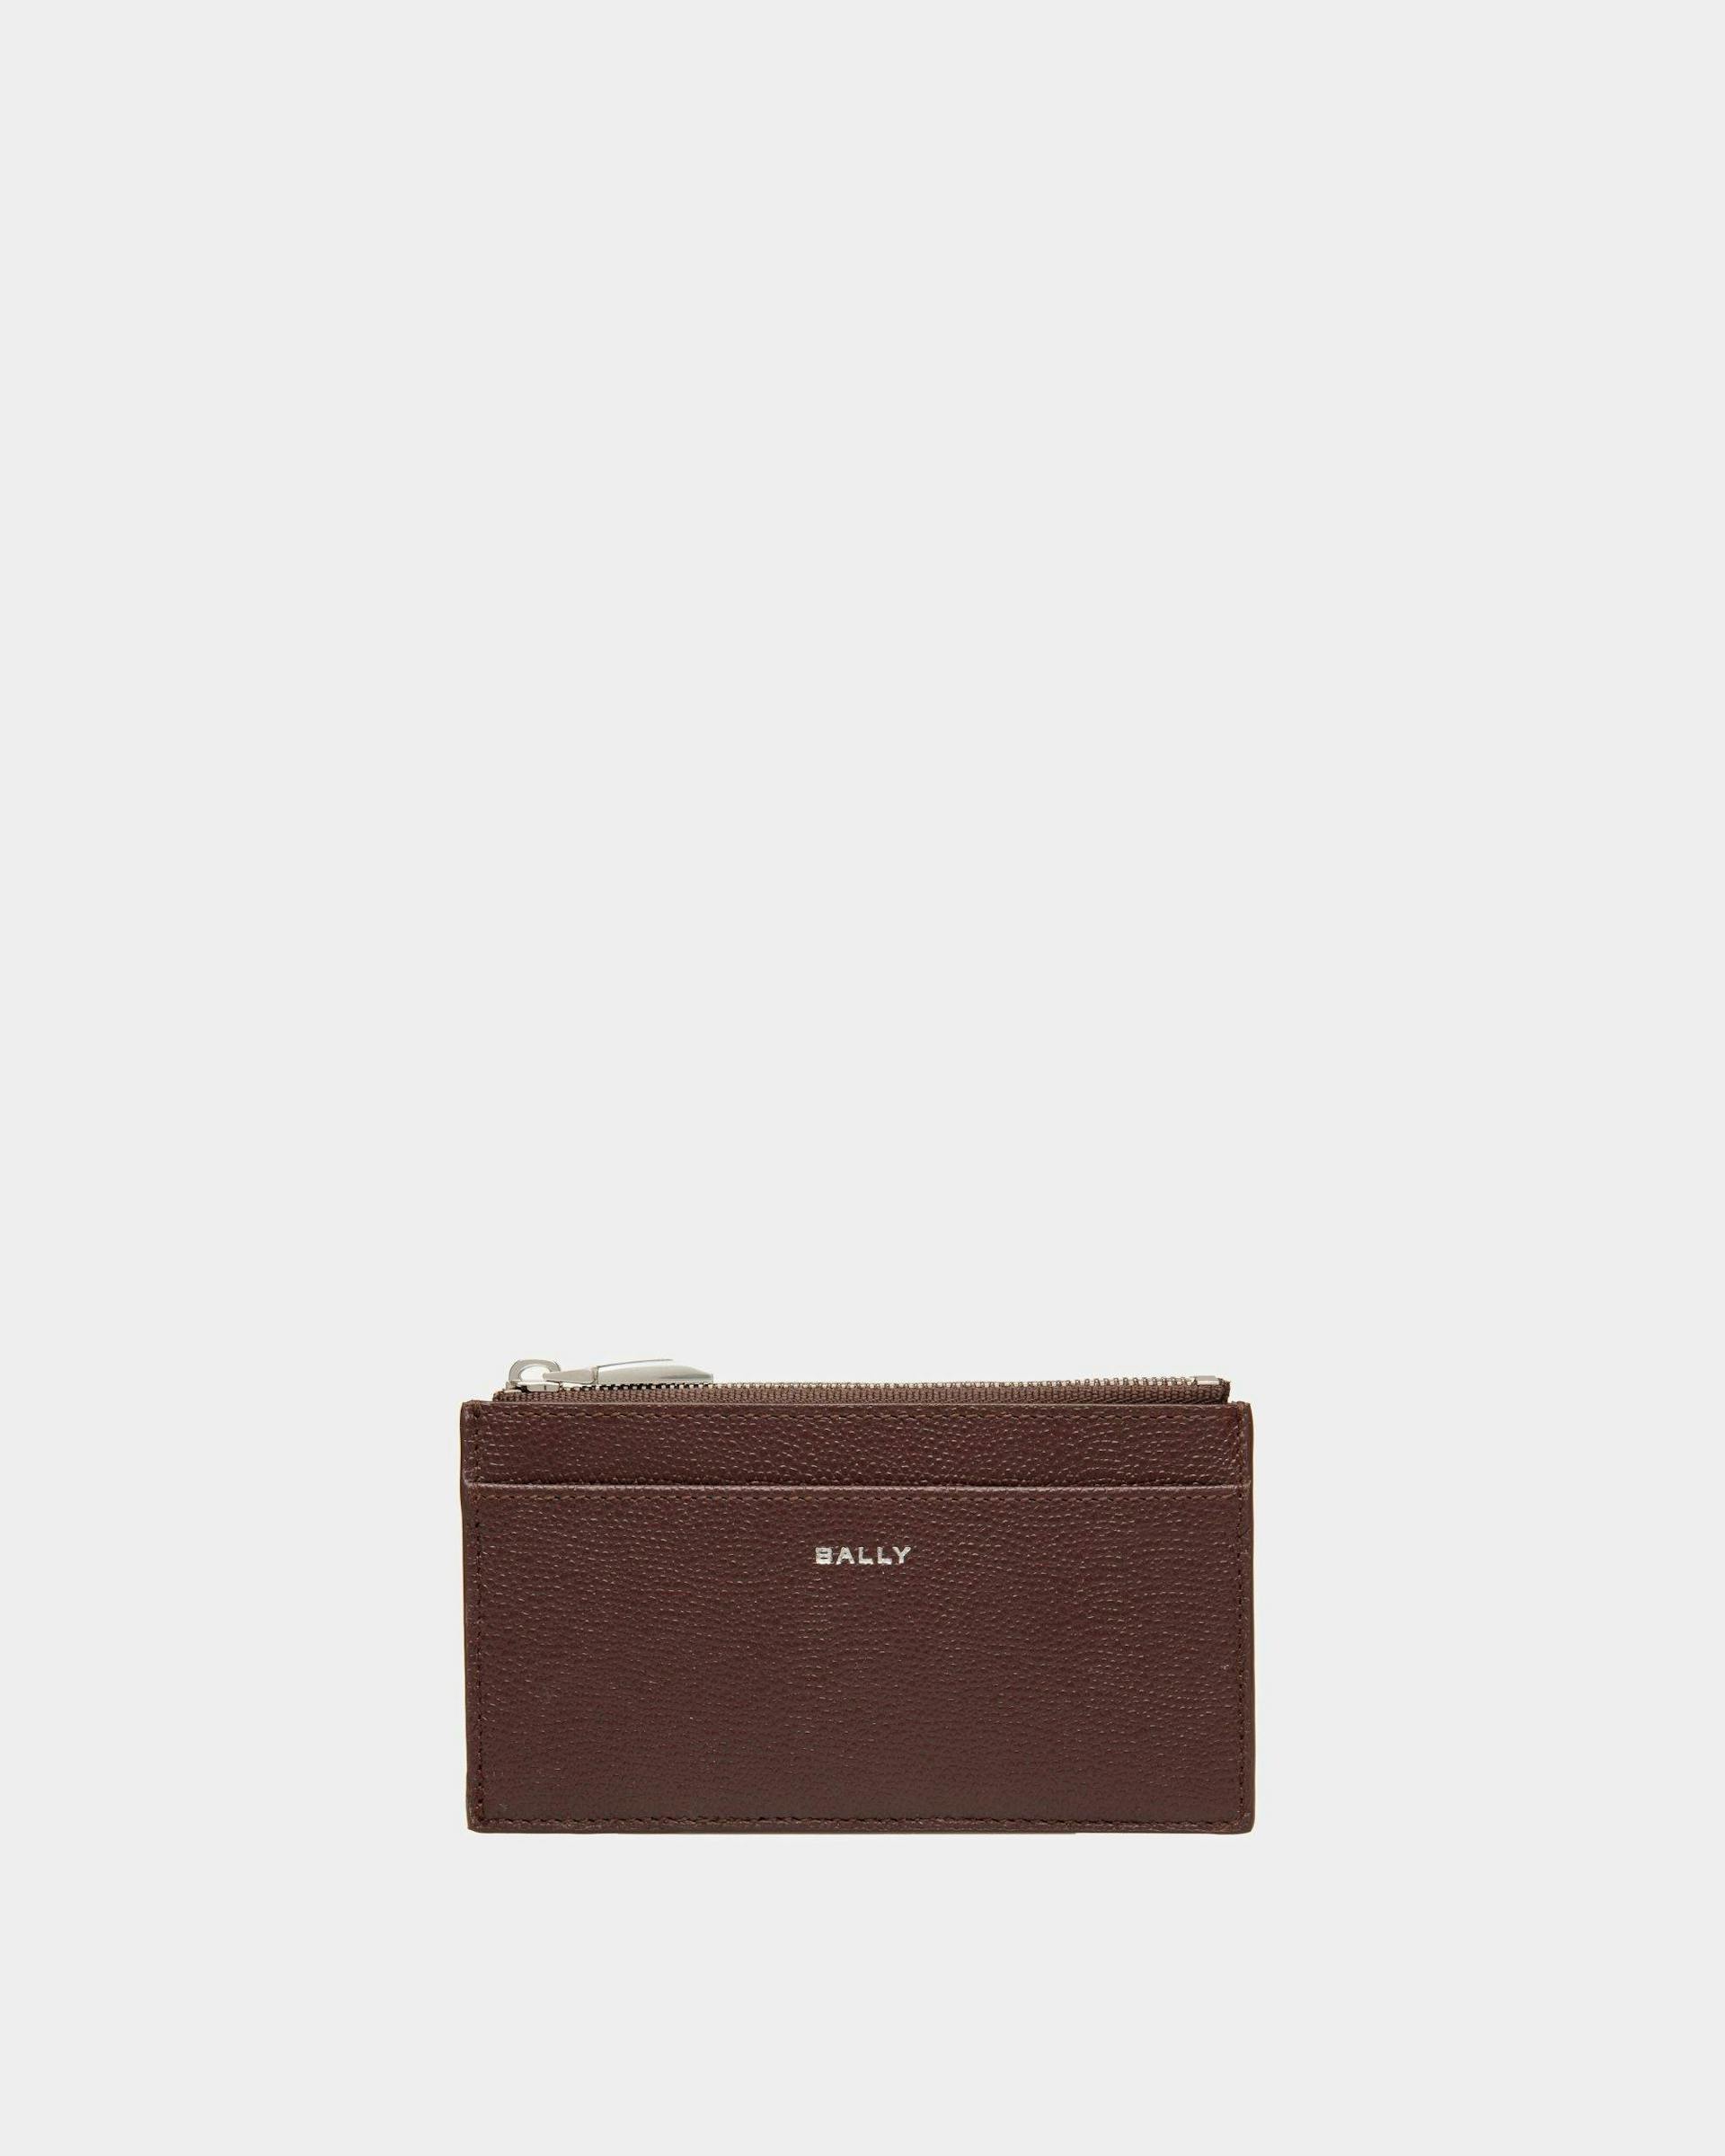 Men's Flag Coin Card Holder In Chestnut Brown And Red Embossed Leather | Bally | Still Life Front